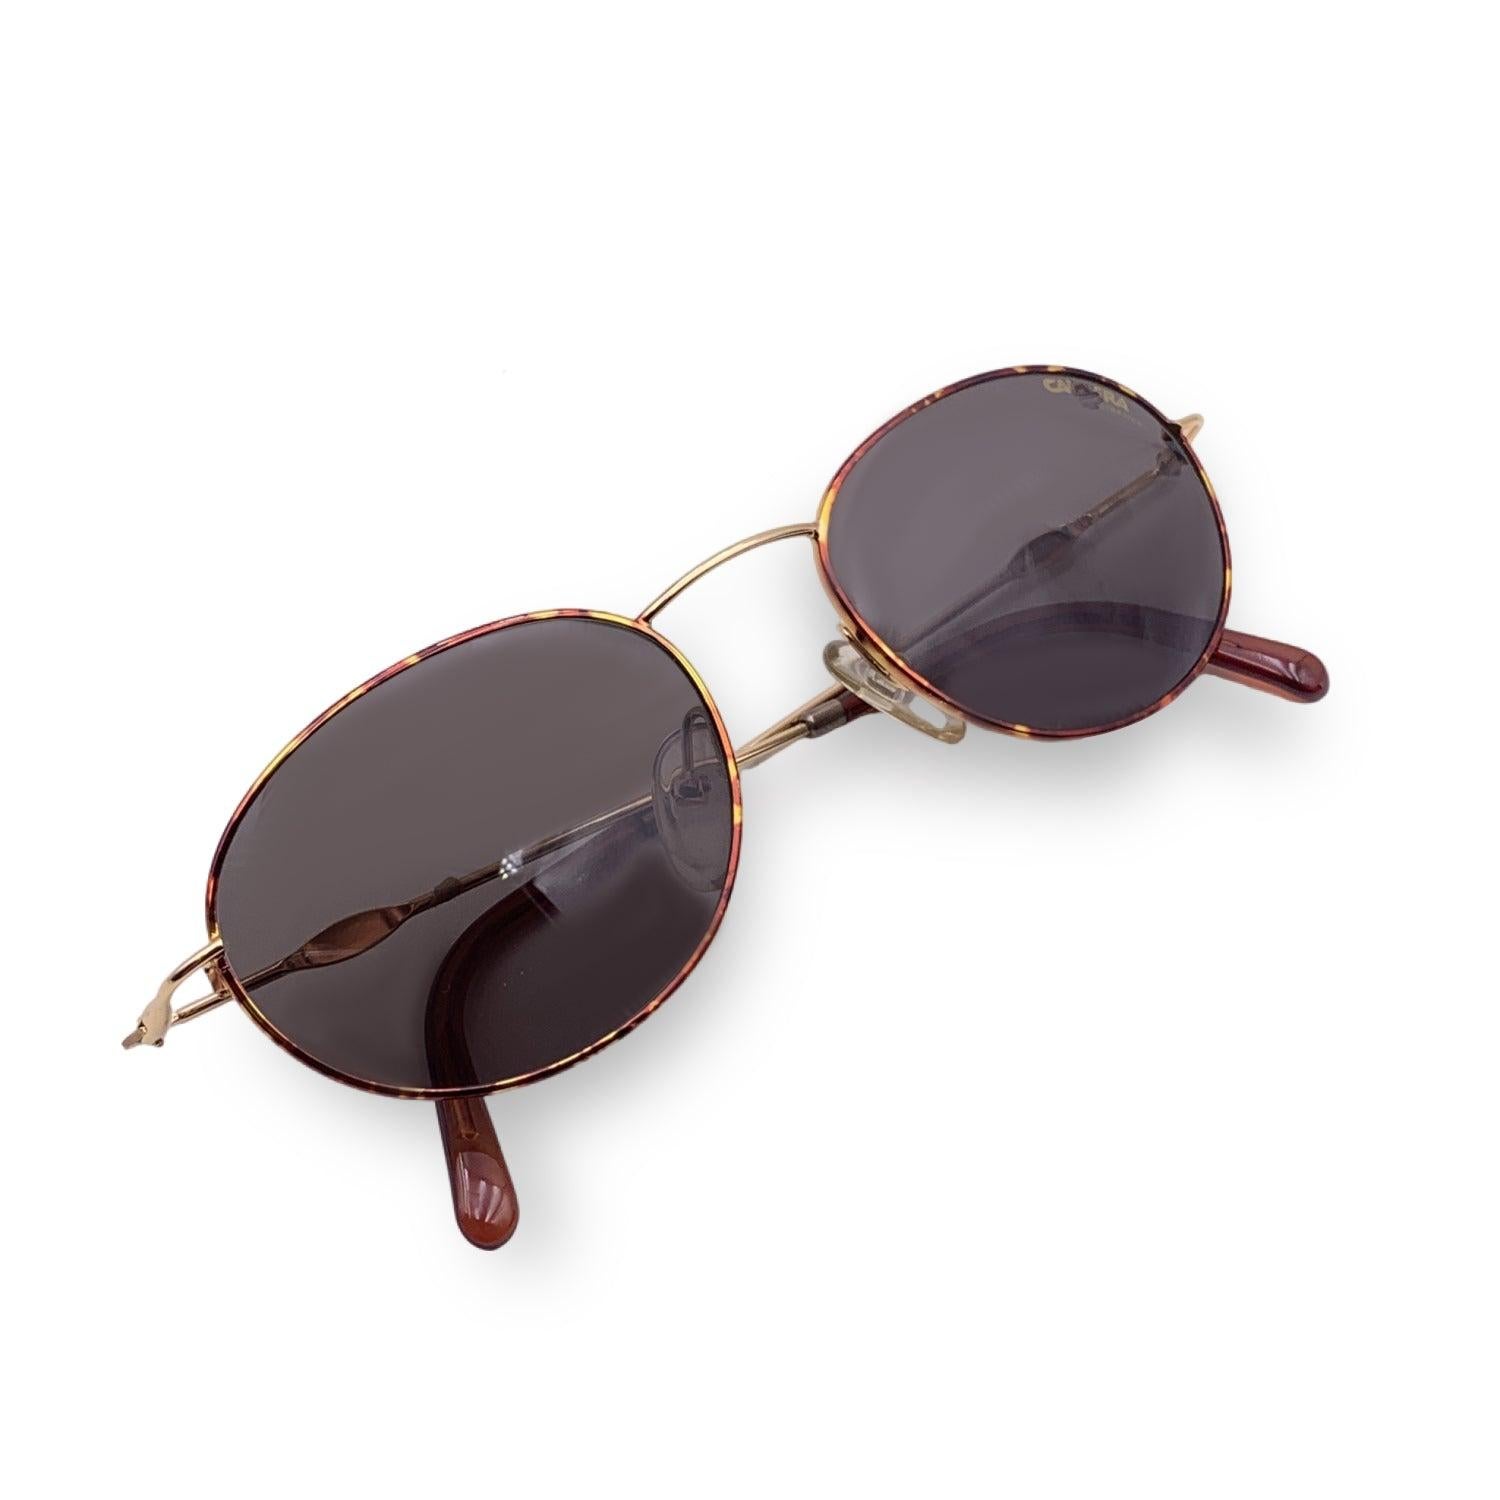 Vintage Carrera Brown Metal sunglasses. Model: 5522 41. Size: 53/19 140mm. Brown tortoise metal frame and with brown acetate on the finish. 100% Total UVA/UVB protection. Gradient Grey lenses. Carrera branding to the bridge. Details MATERIAL: Metal